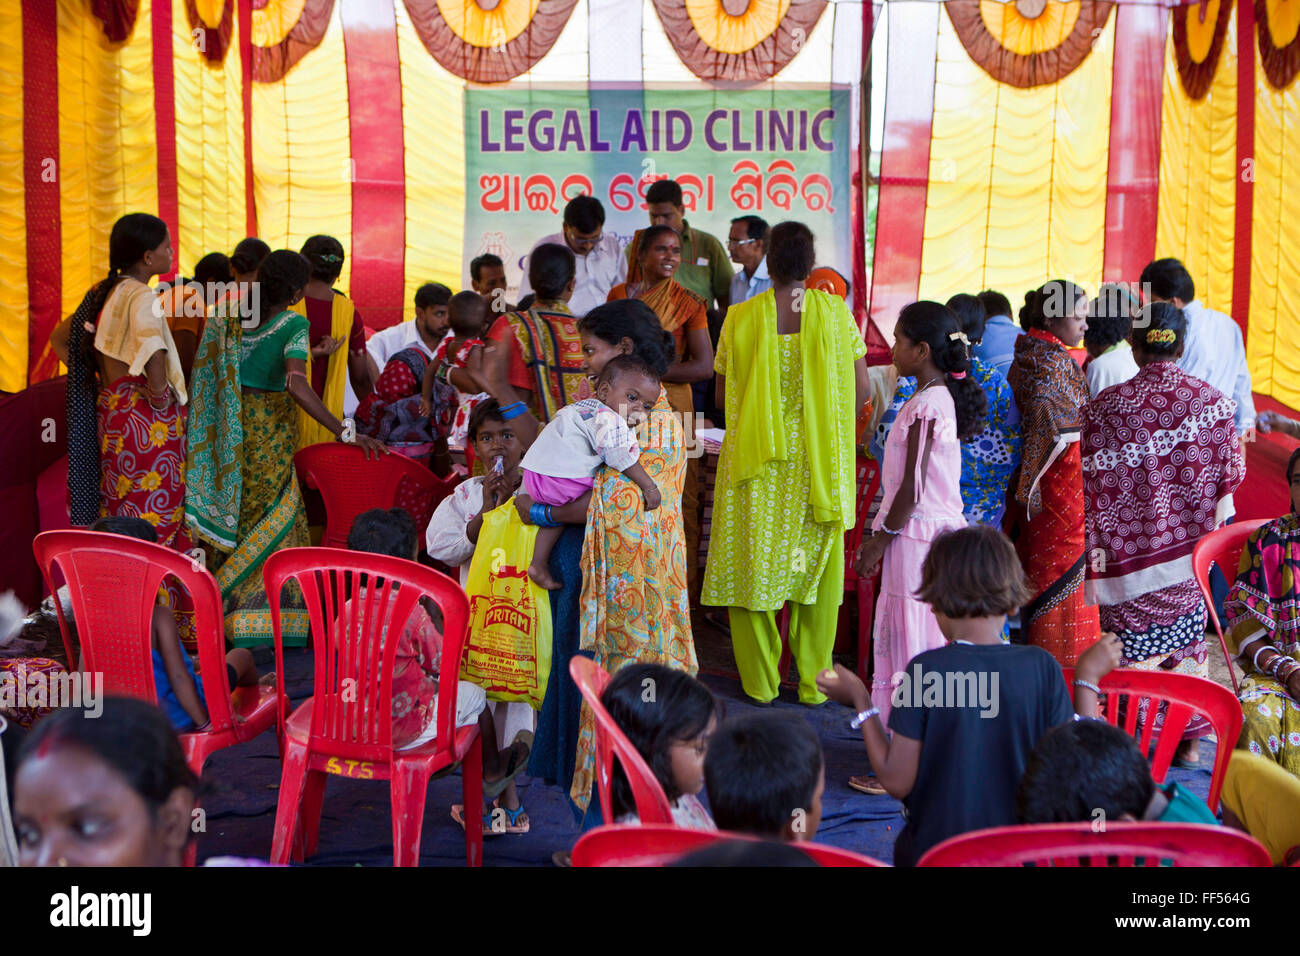 Families from Cuttack get legal advice and birth certificates from a Legal Aid Clinic run by the organisation CLAP. Committee for Legal Aid to Poor (CLAP), helps provide legal aid to the poorer communities in the Orissa district of India. Stock Photo